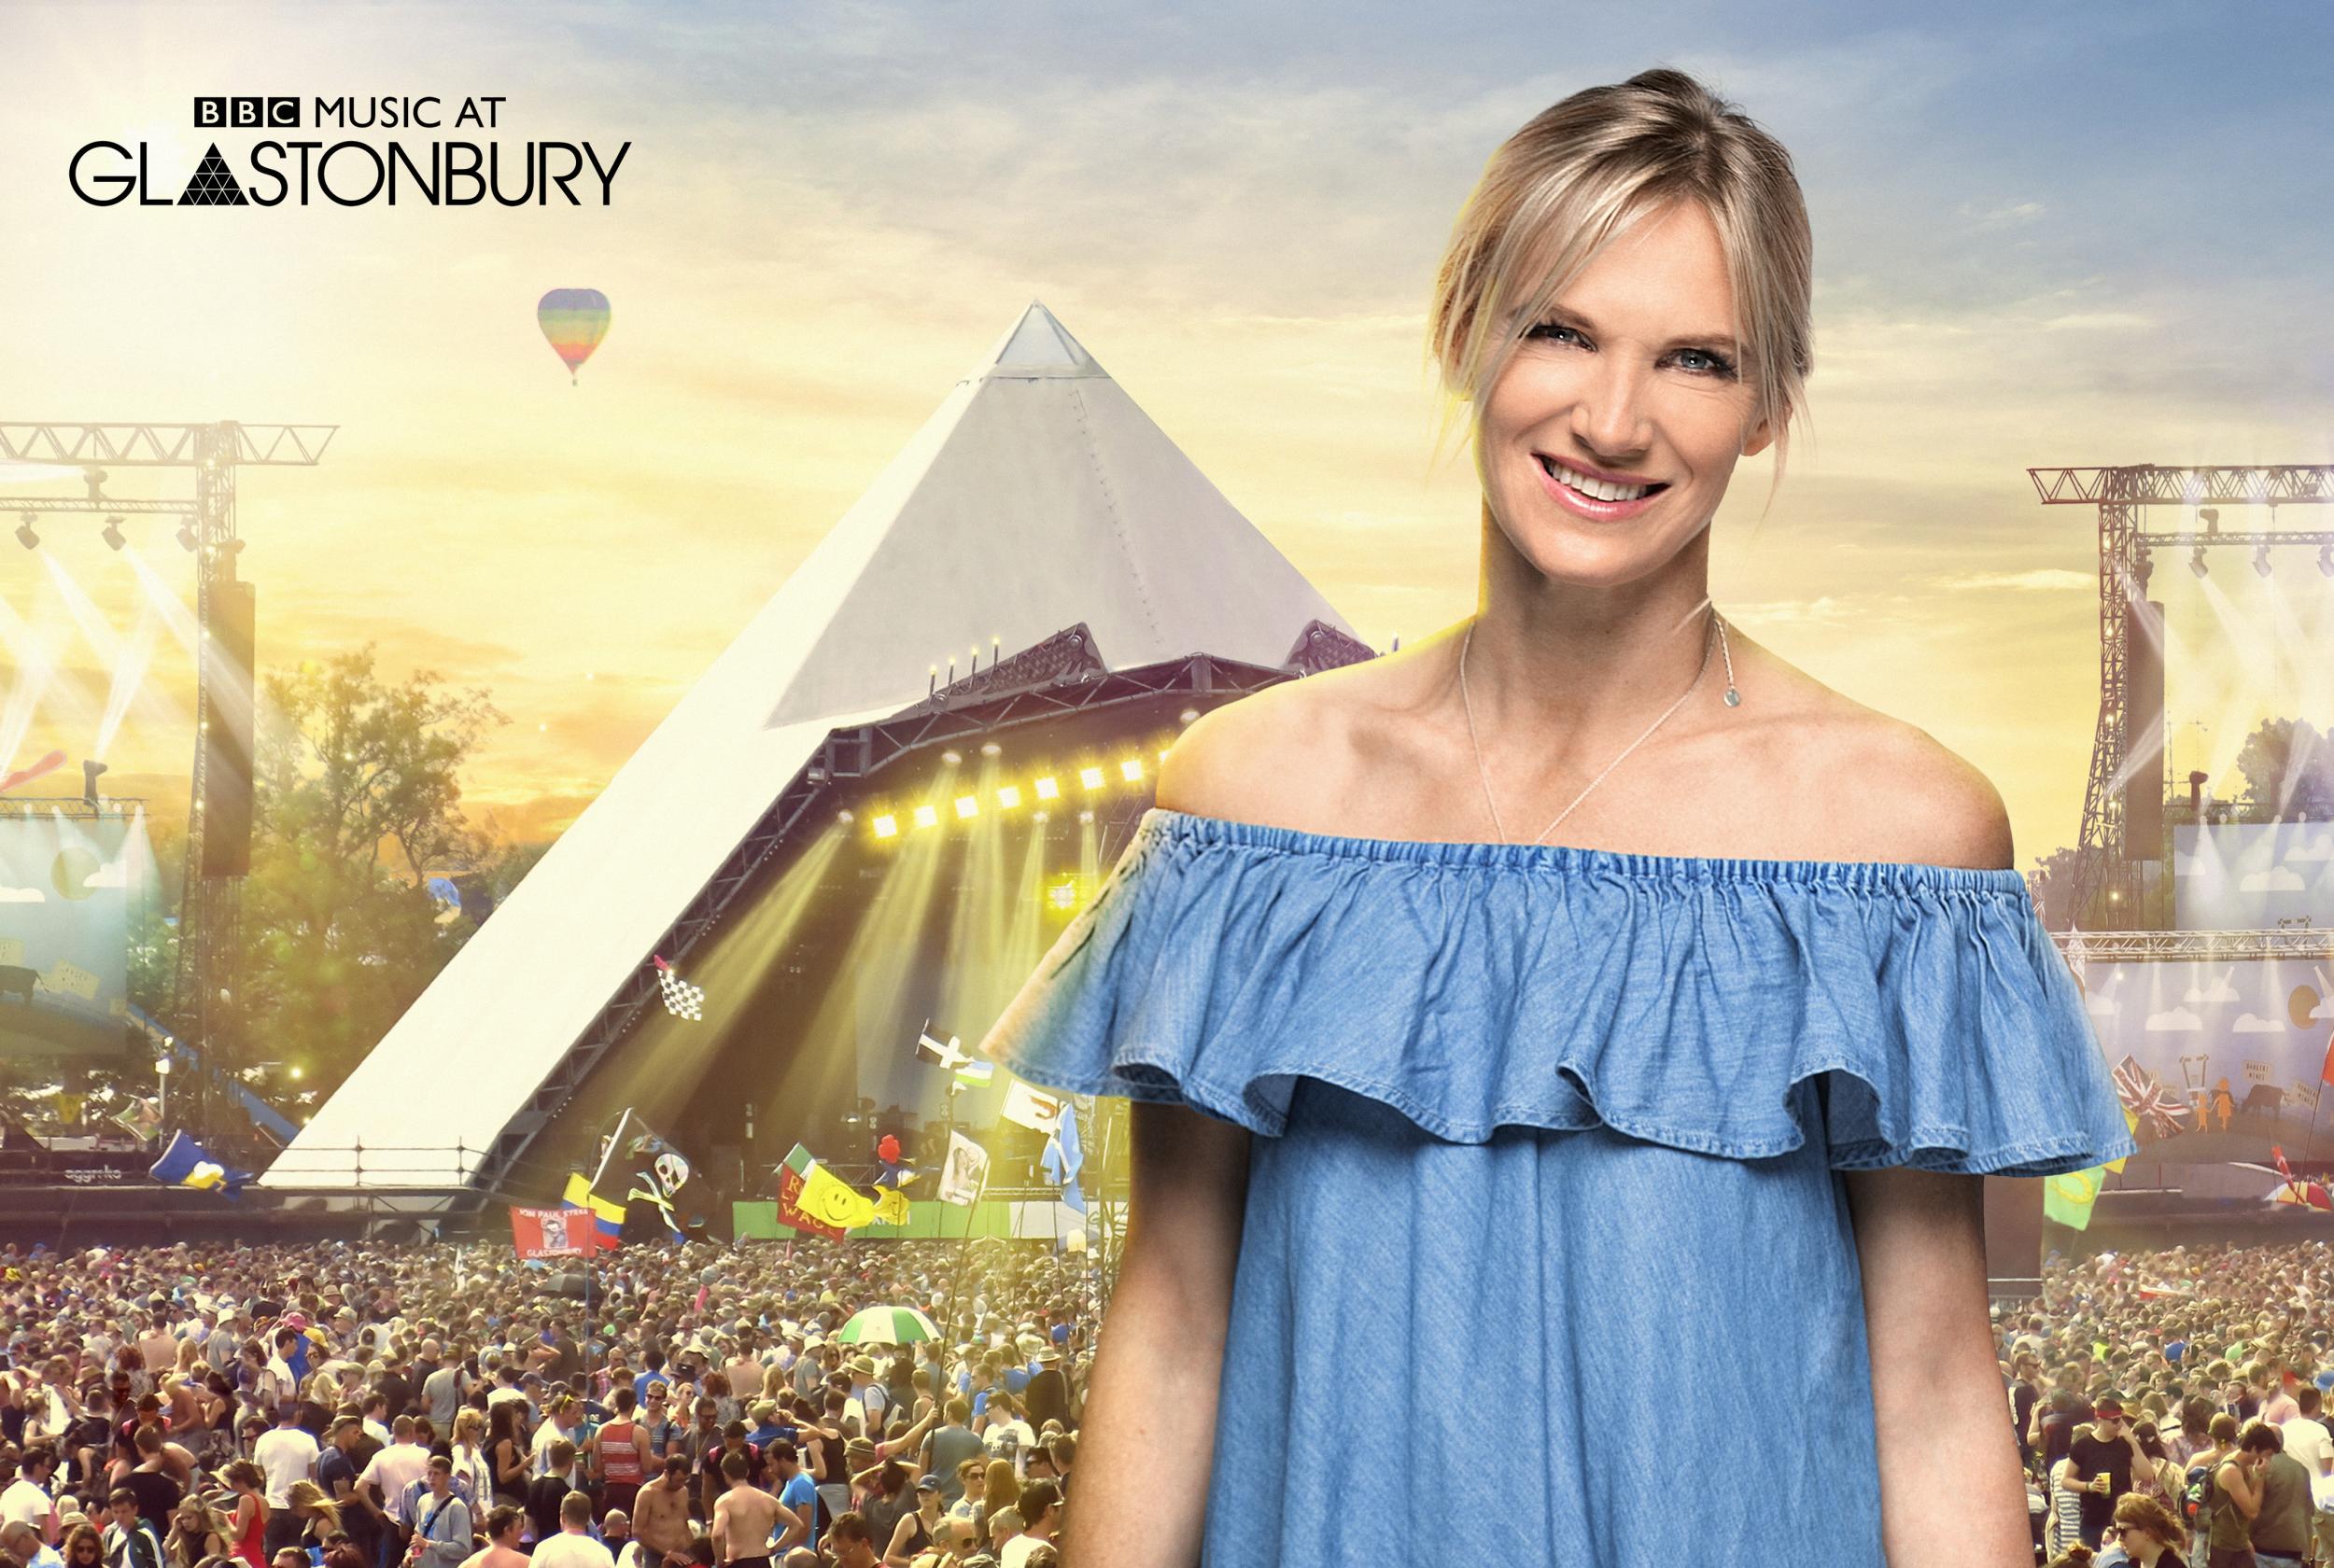 Centre stage: Jo Whiley will be introducing us to The Killers, Liam Gallagher and Janet Jackson today